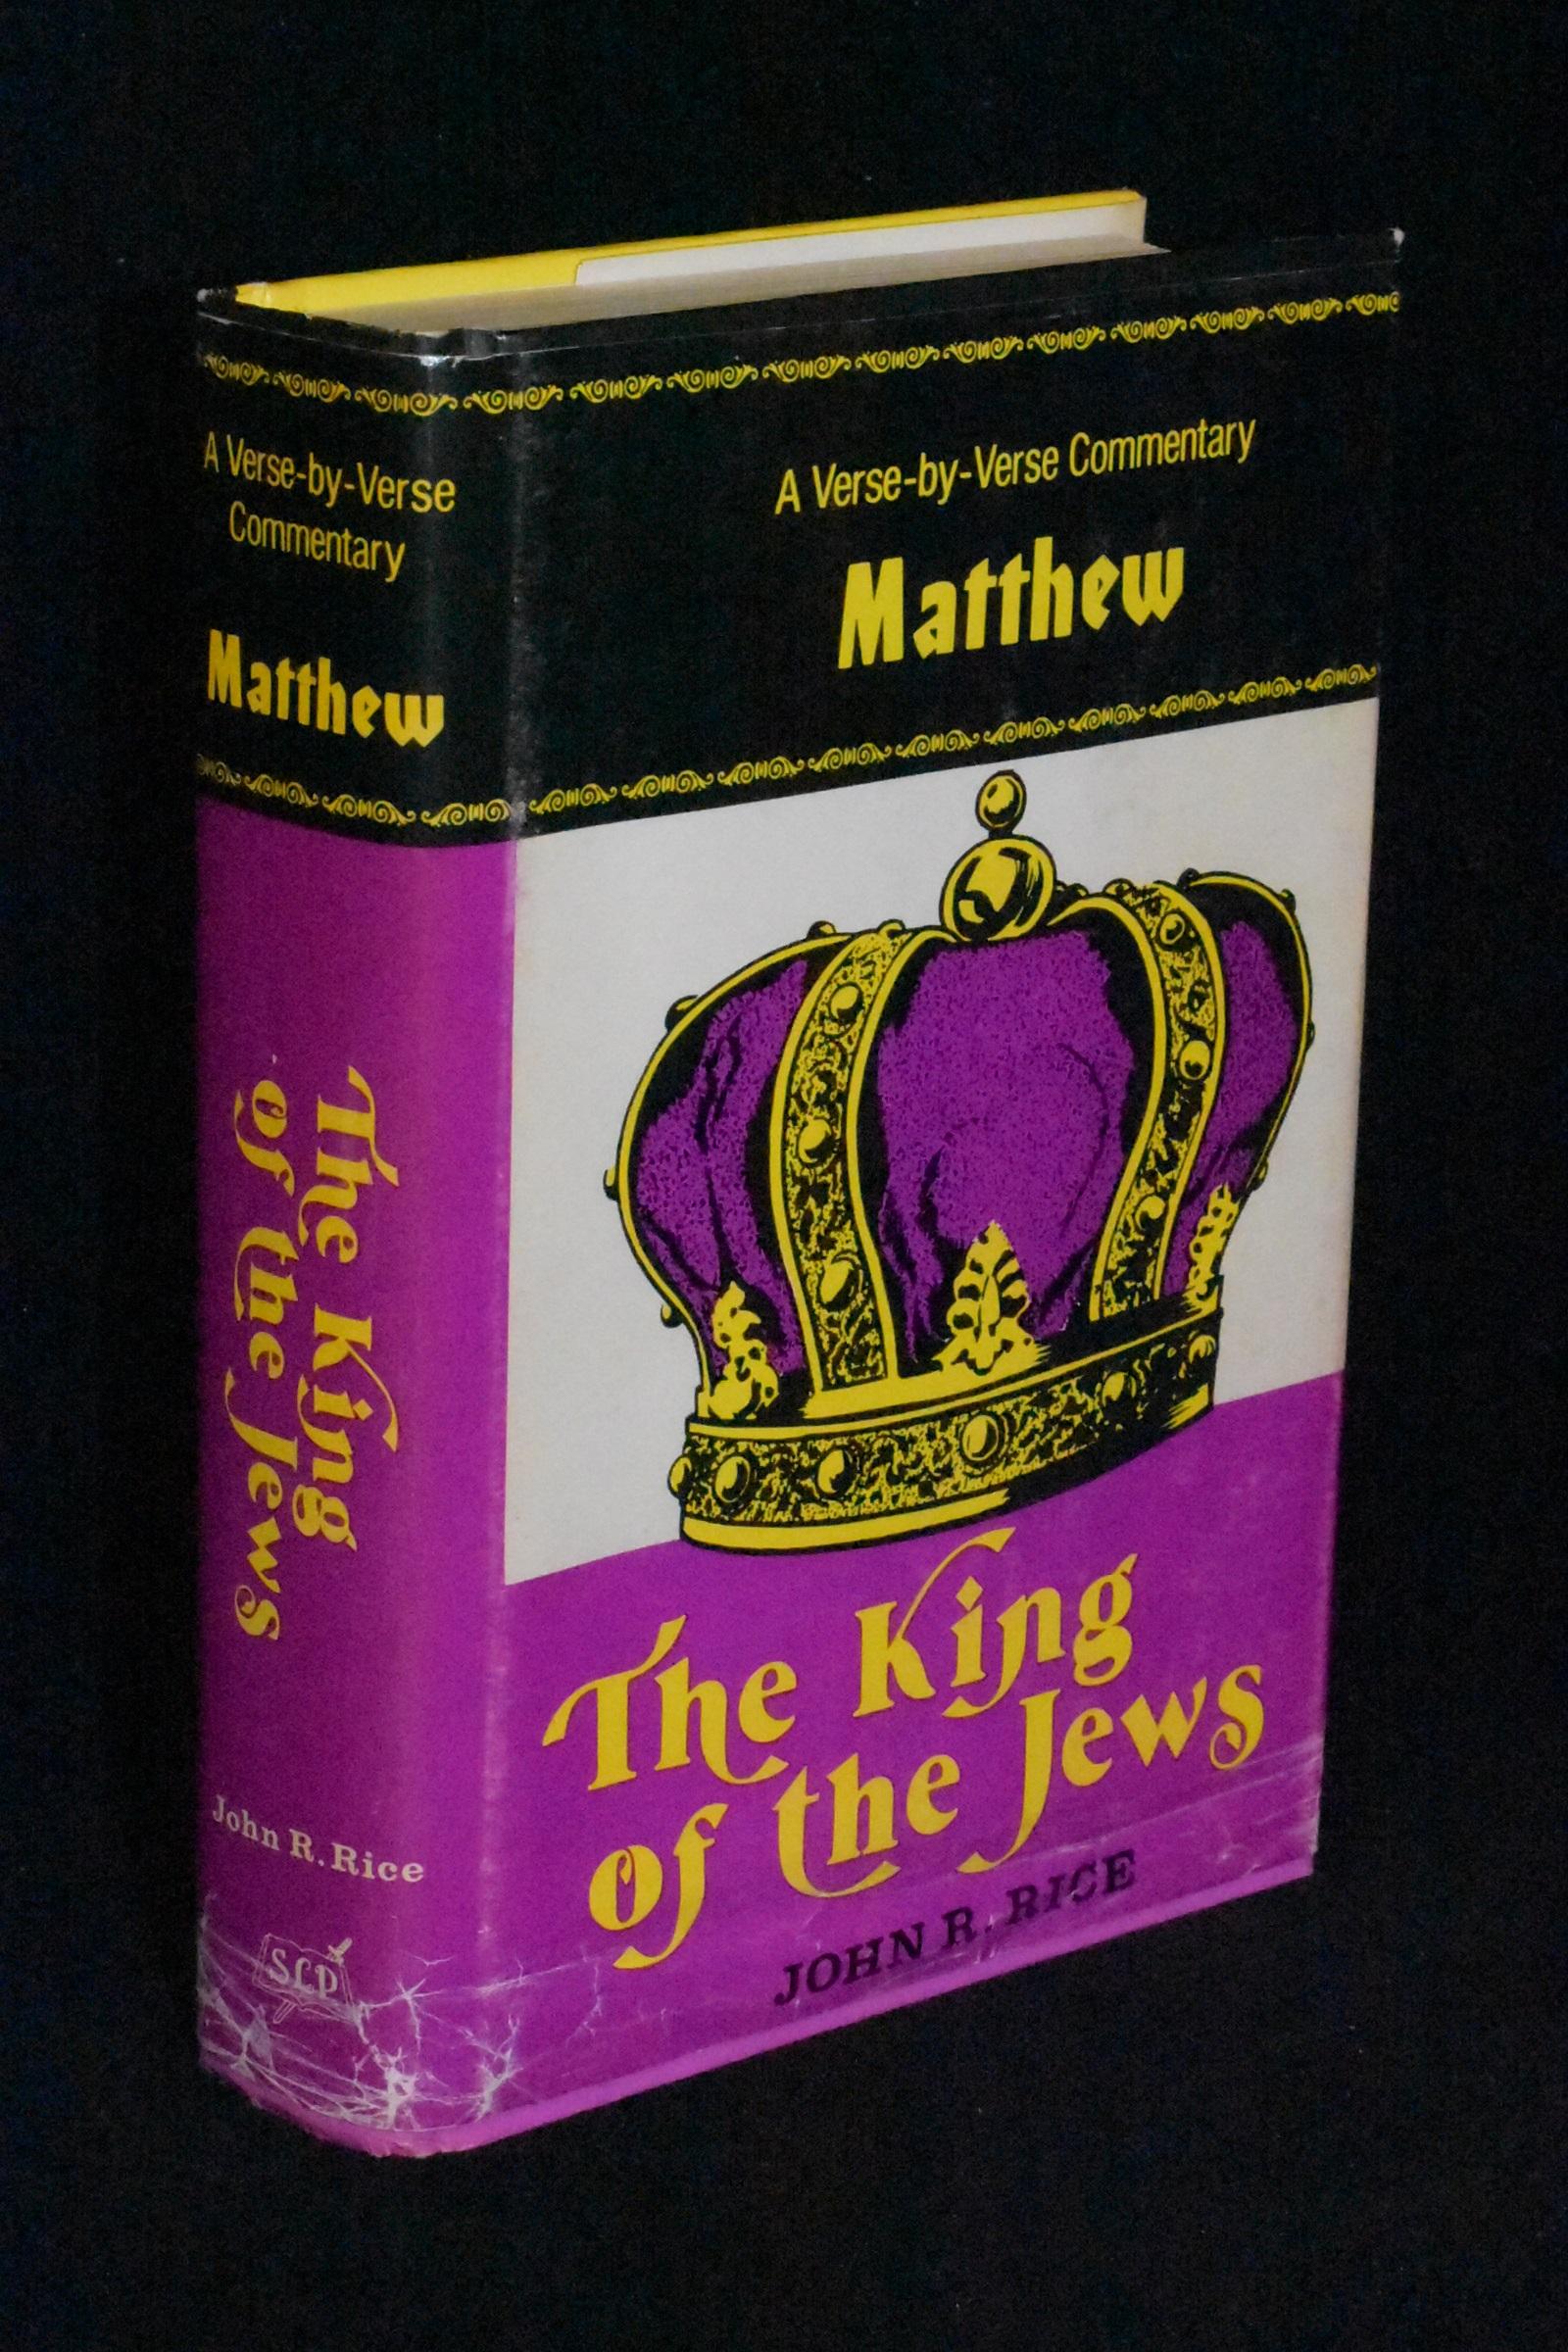 The King of the Jews: A Verse By Verse Comentary on the Gospel According to Matthew - John Rice